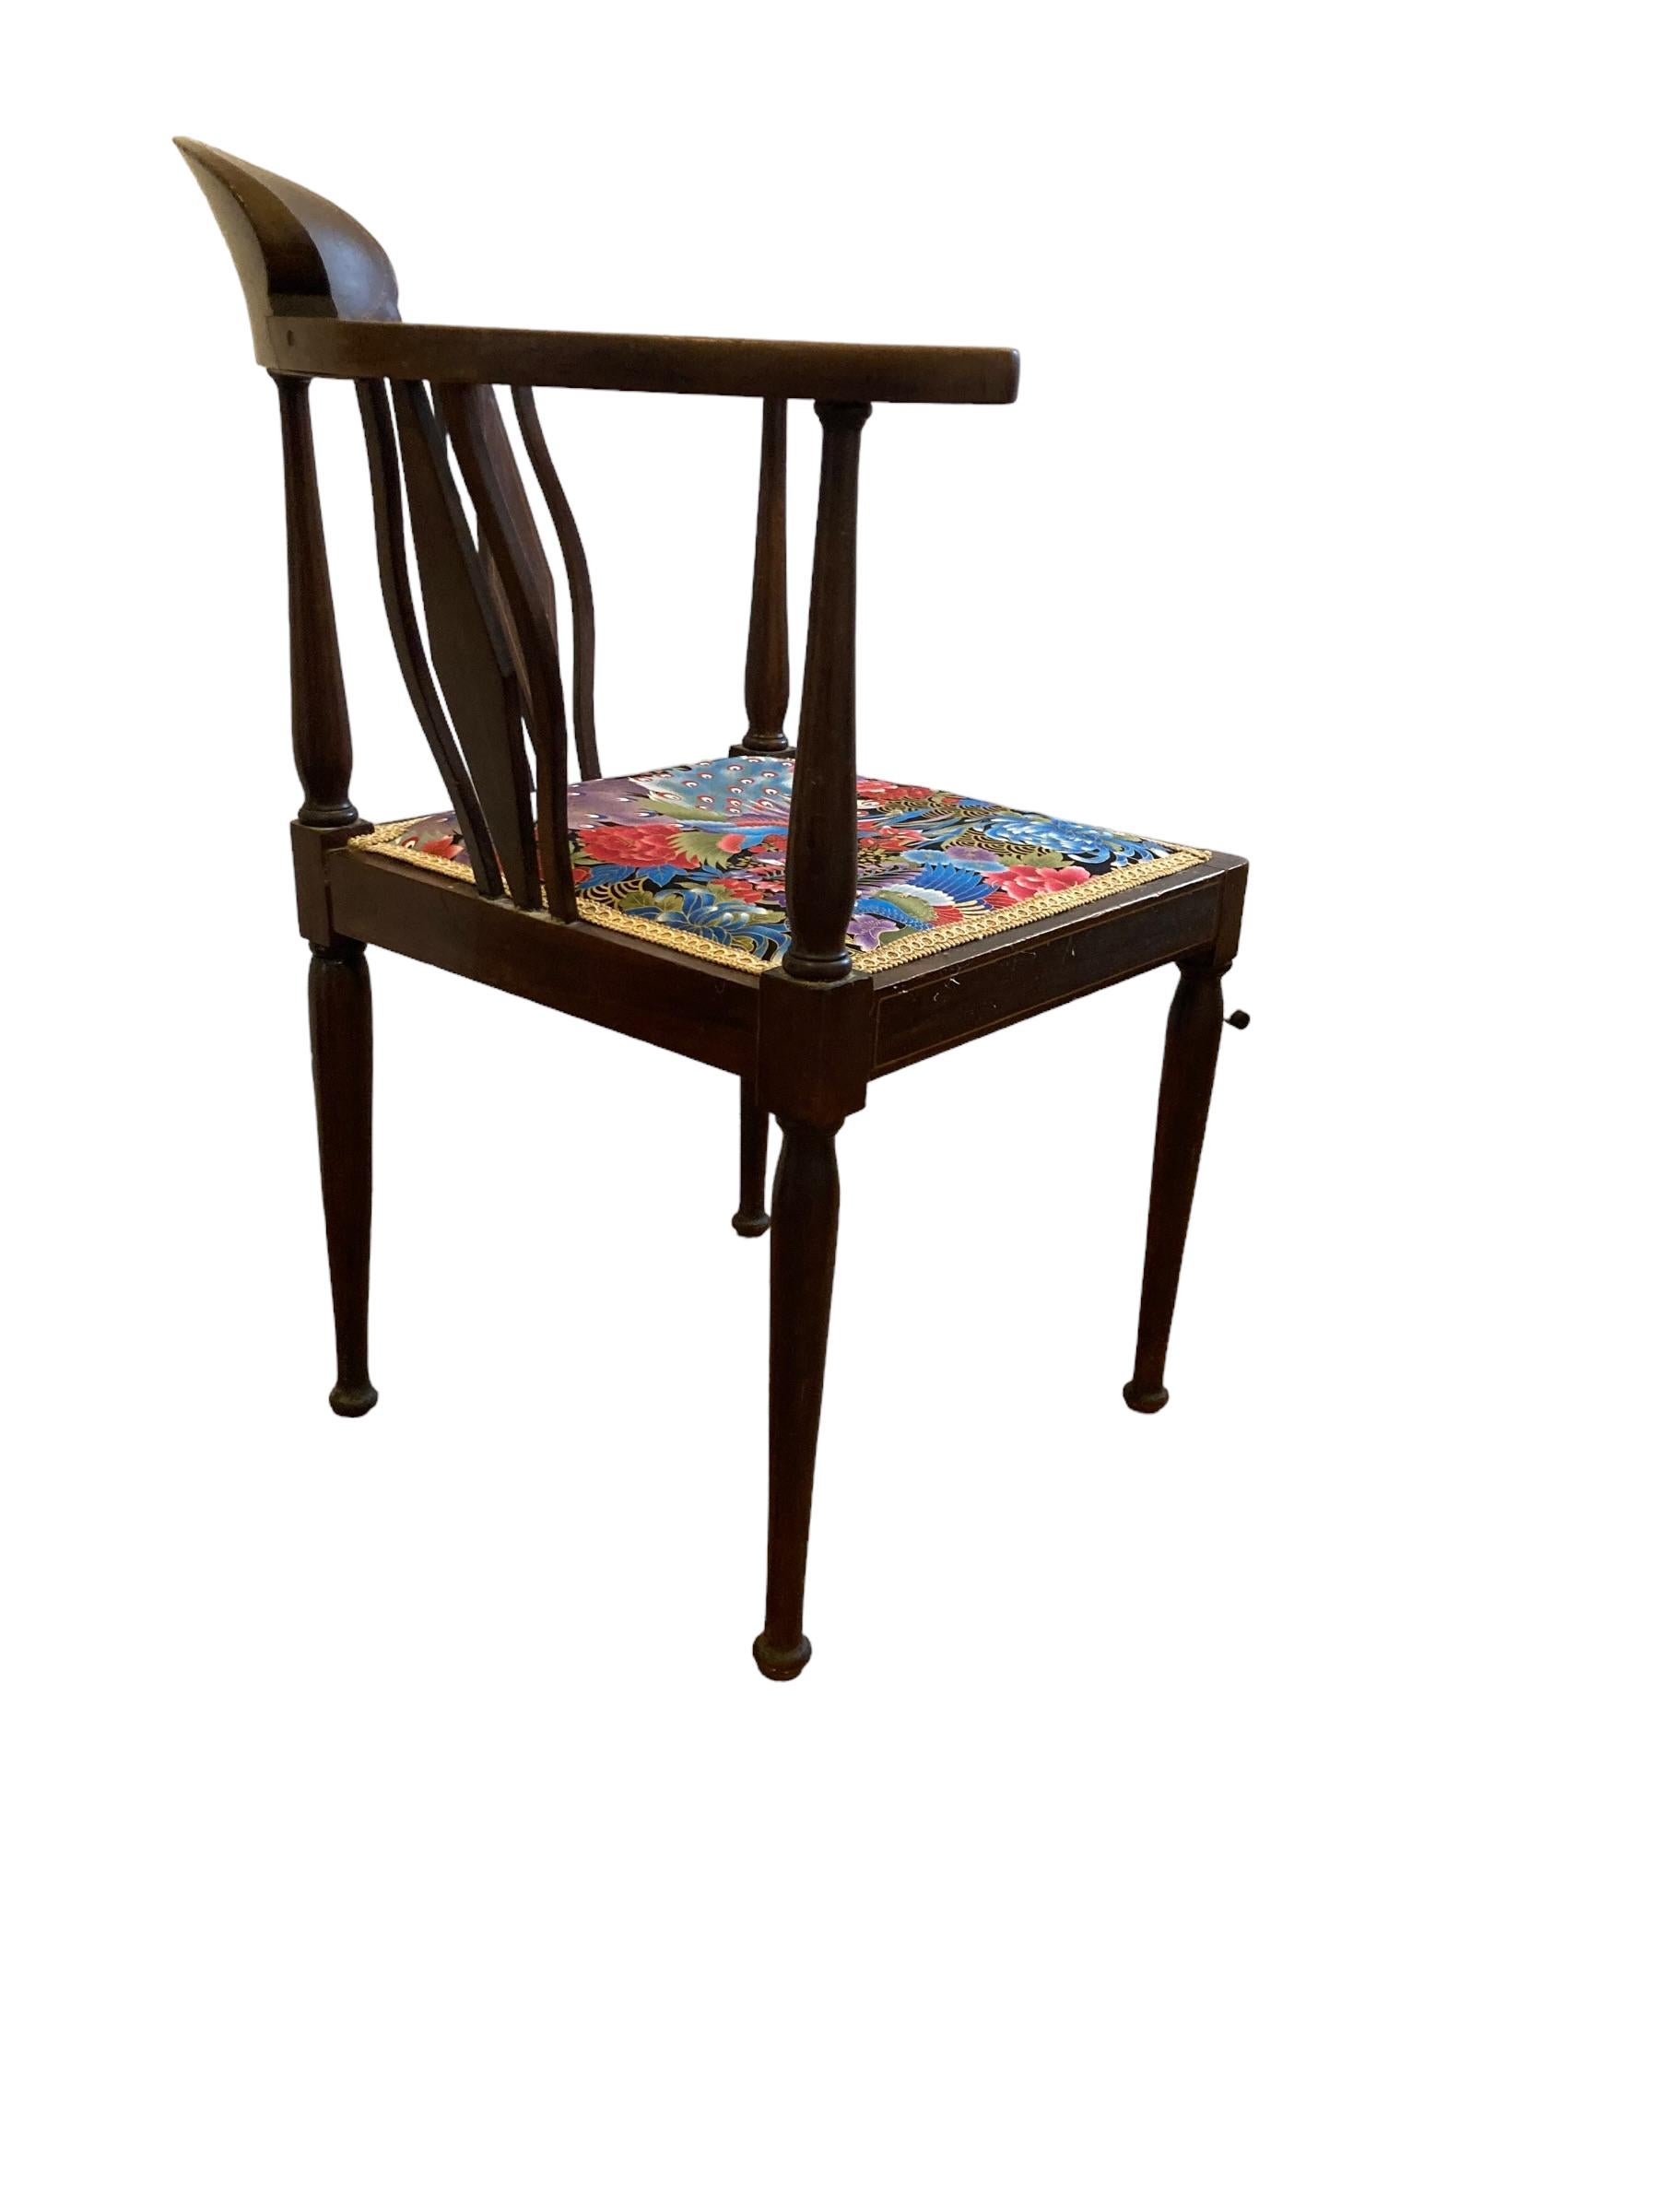 19th Century Edwardian Inlaid Corner Chair 1900's For Sale